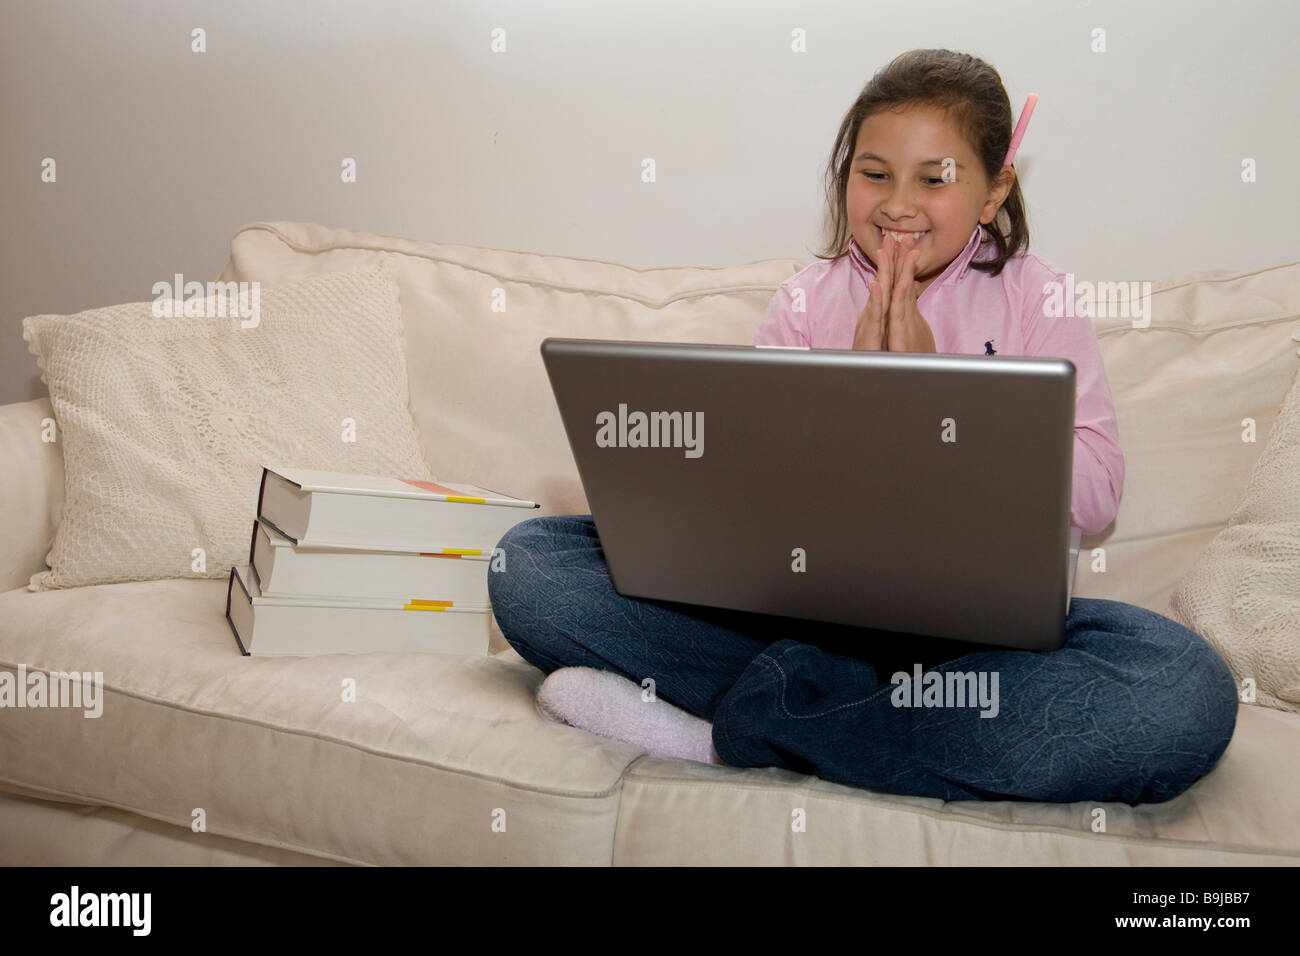 Student, approx. 11 years old, working on a laptop is pleased Stock Photo